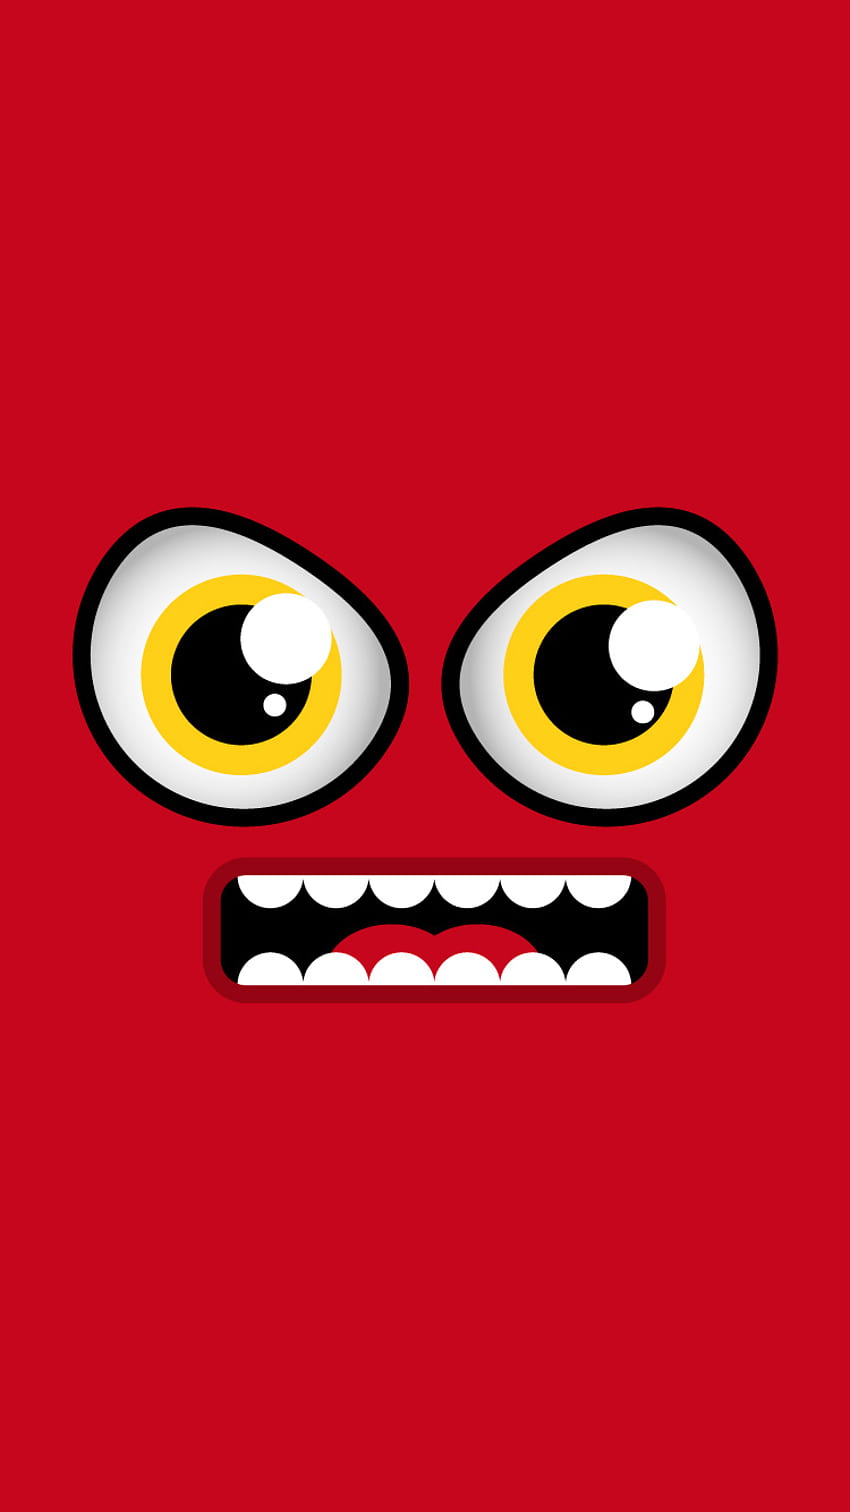 Cool Faces iPhone 5 & iPhone 6 for Daily Mood, Awesome iPhone 5S HD phone wallpaper